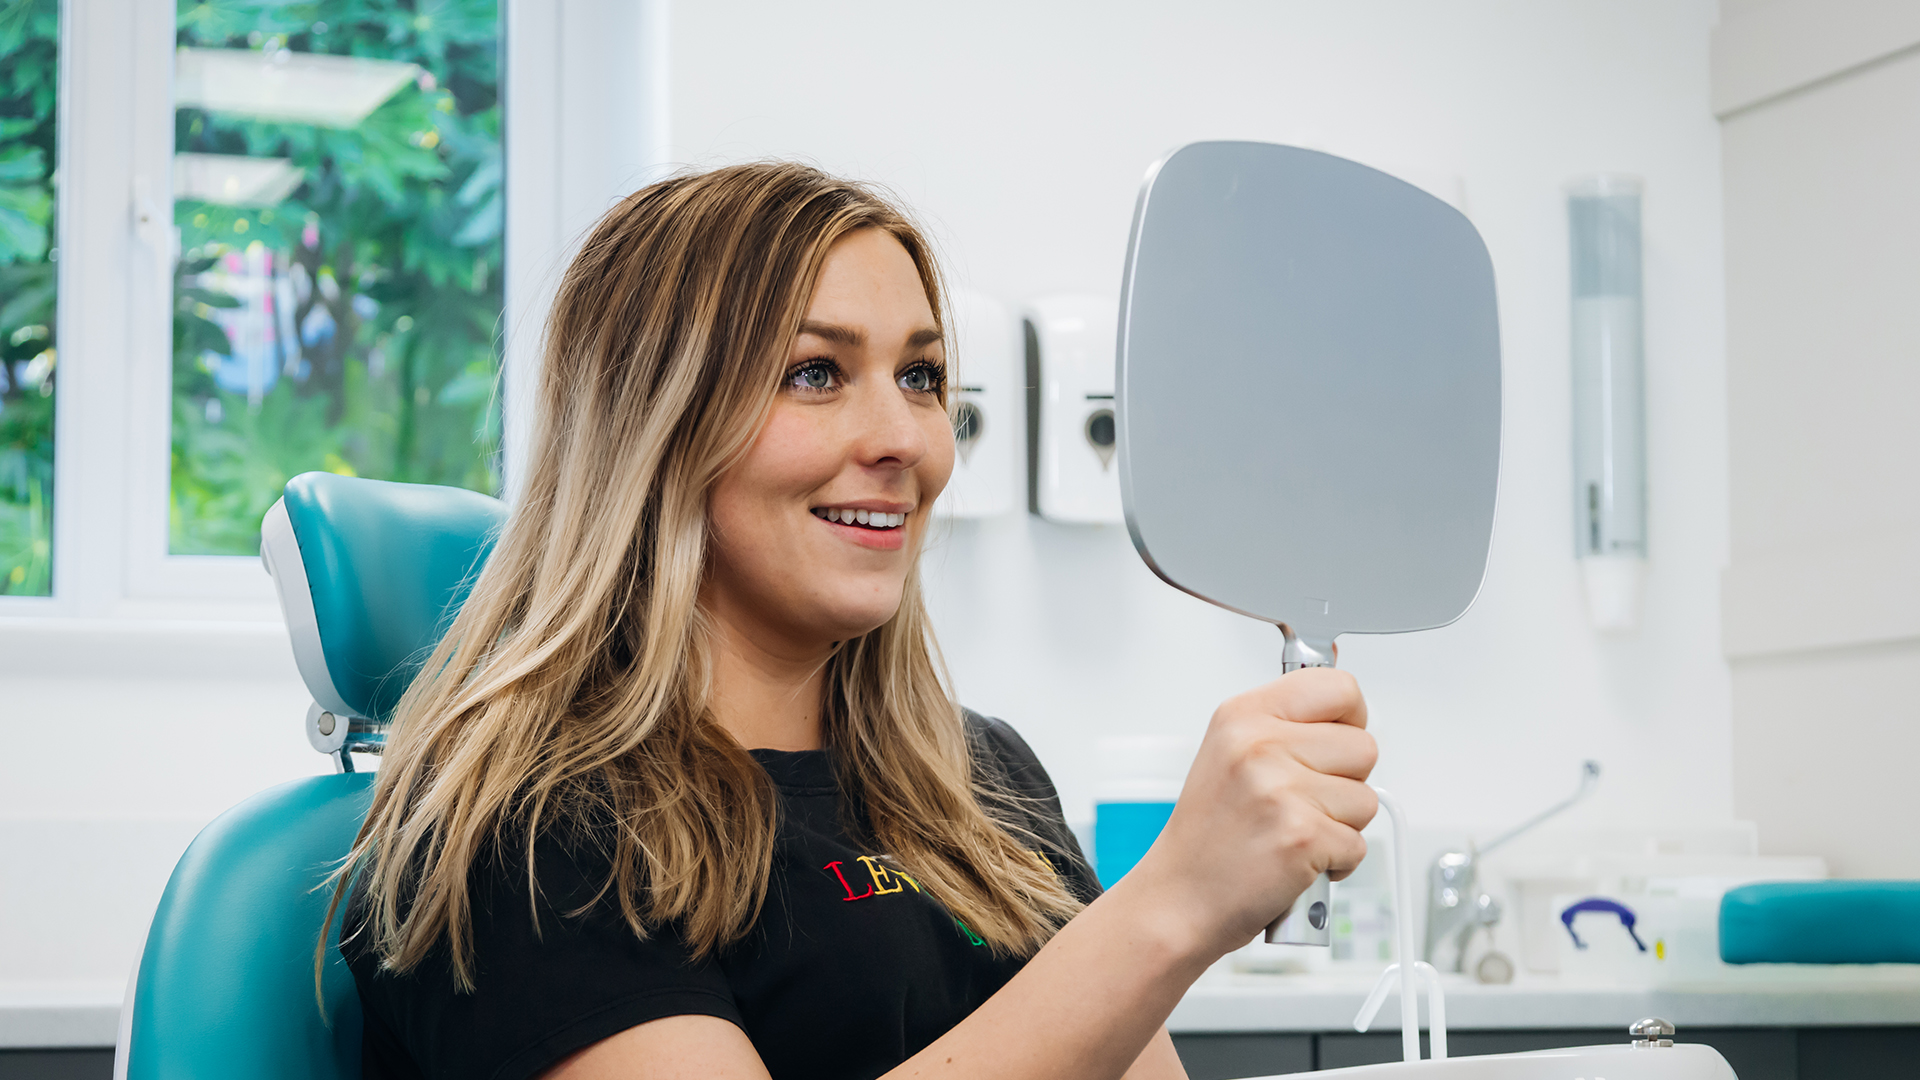 A female patient with blonde hair looking into a handheld mirror and smiling